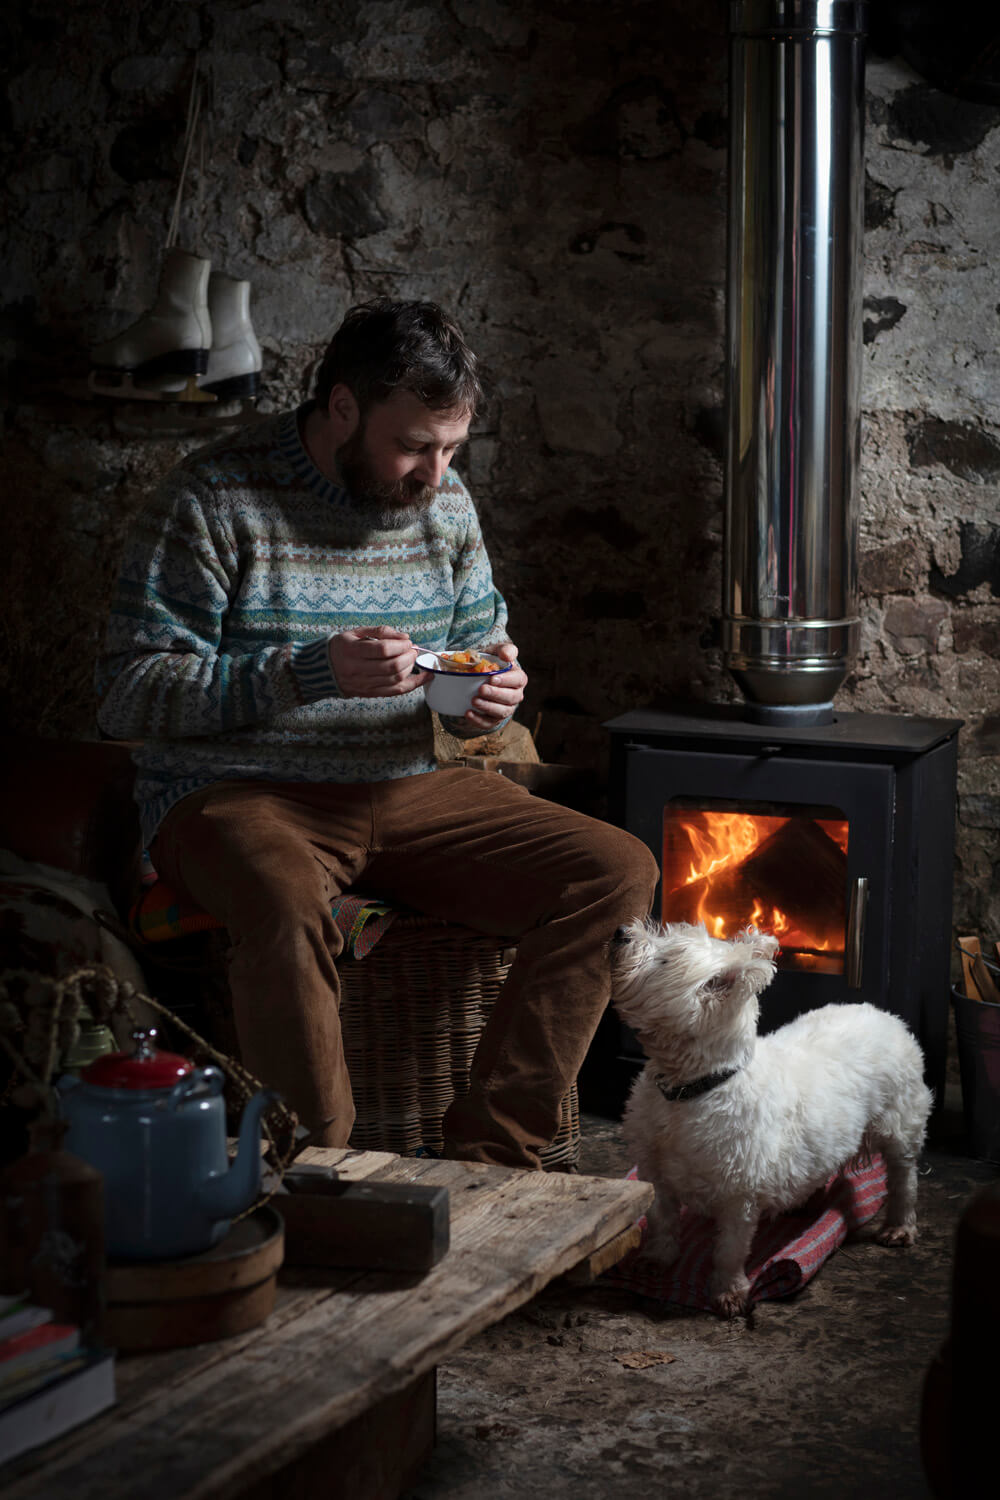 A man in a patterned sweater sits comfortably on a wicker chair, eating from a bowl in a rustic stone cottage, with a wood-burning stove and a small white dog looking up at him, creating a cozy and intimate atmosphere.